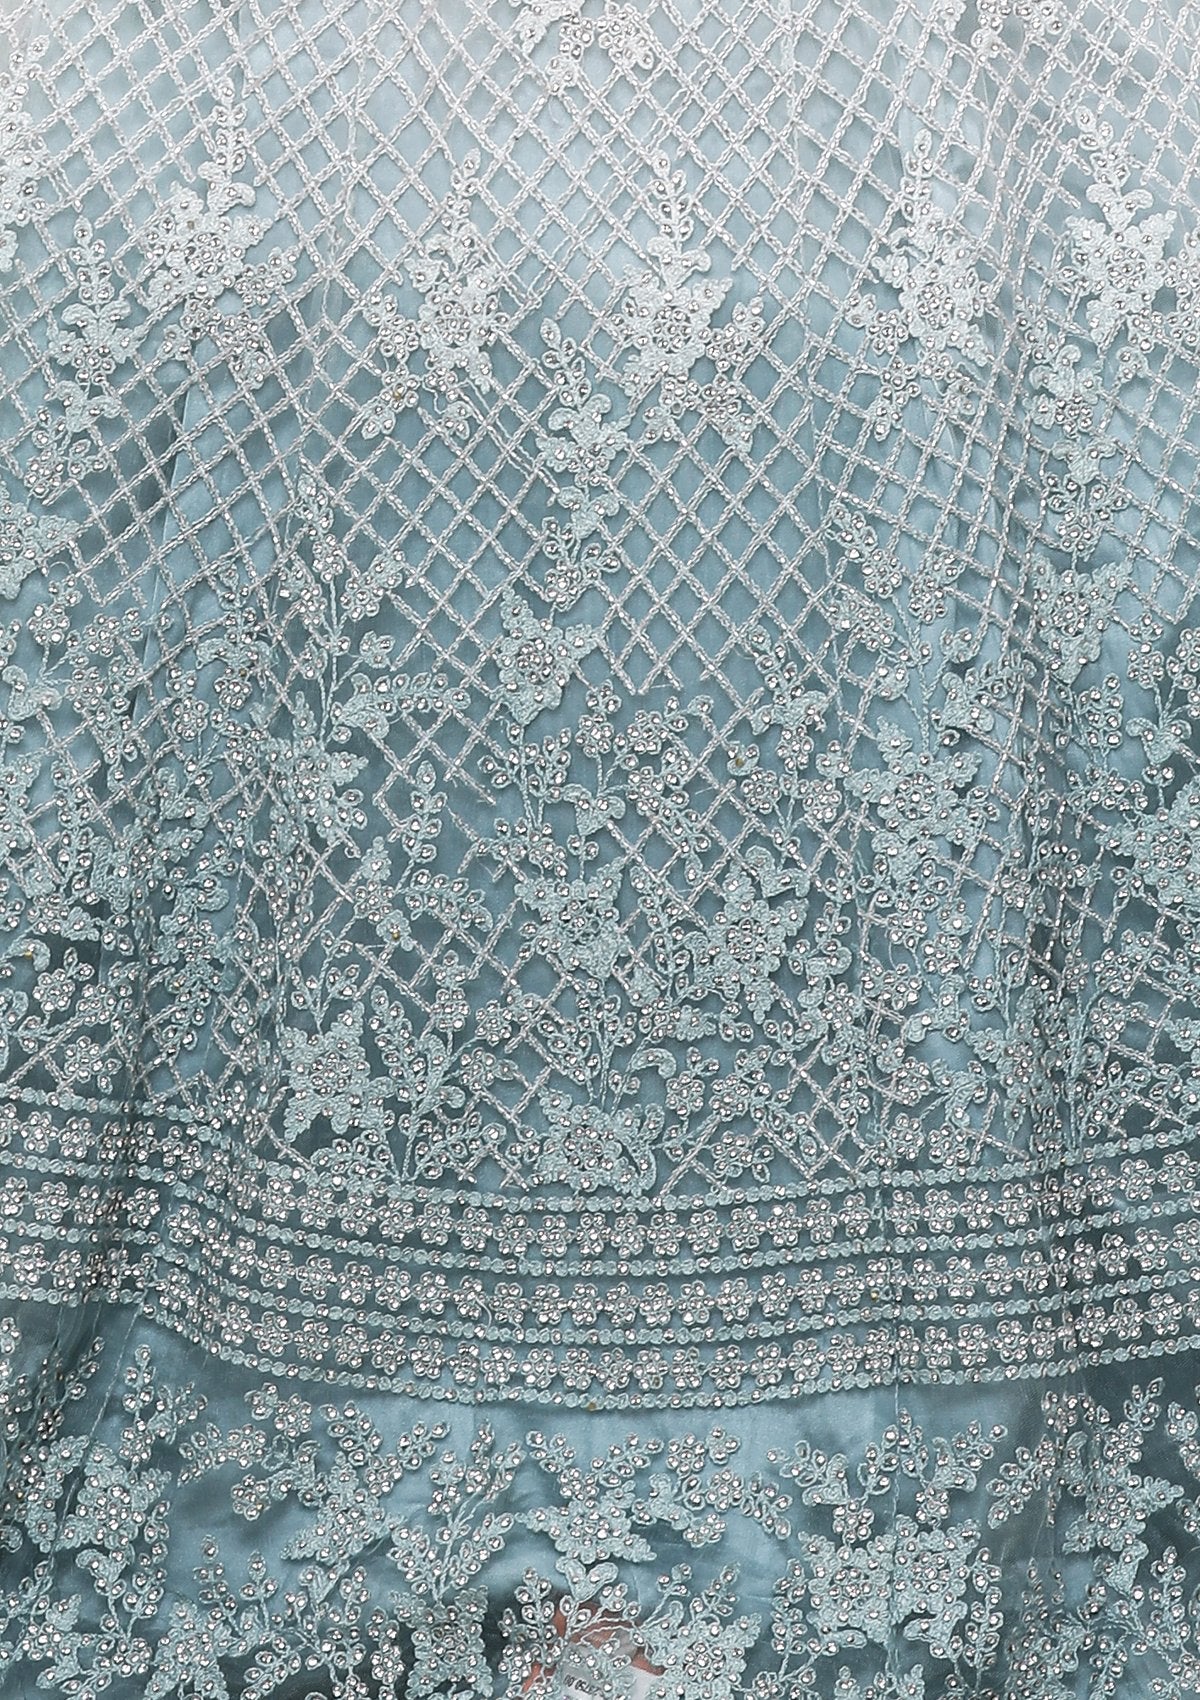 Sky Blue and White Ombre Designer Gown-Koskii